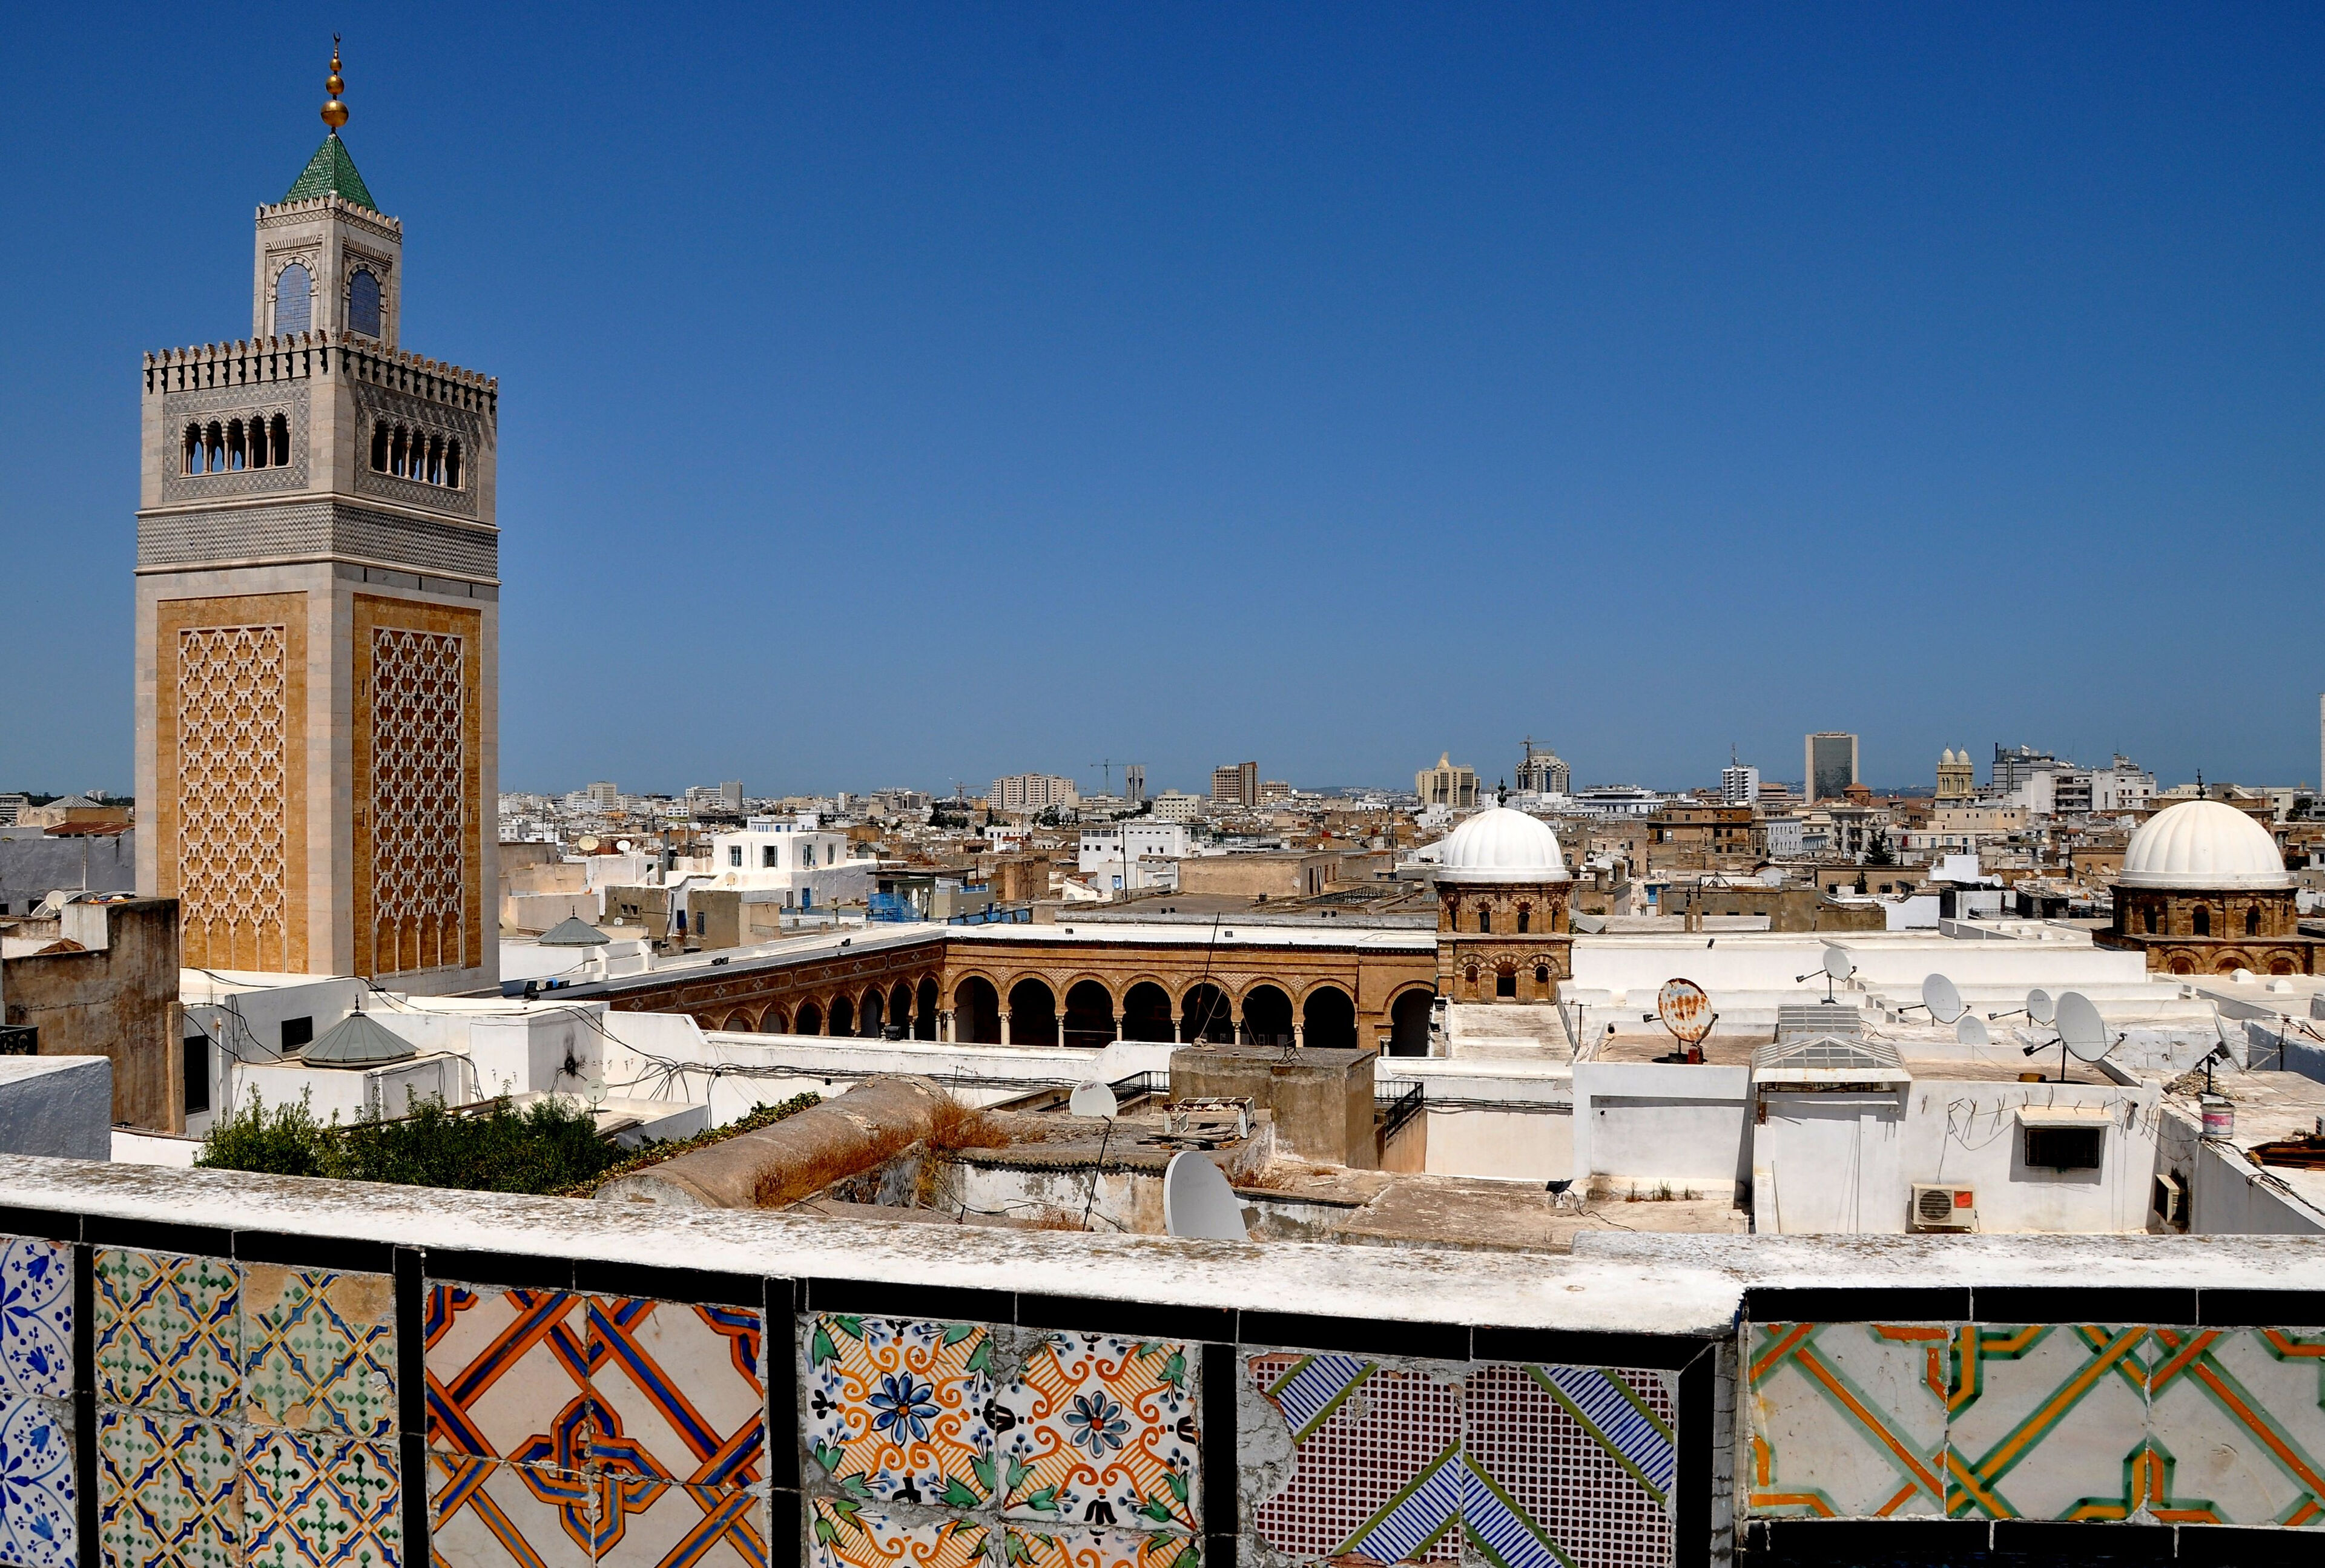 View of the rooftops of the Medina of Tunis and the Zitouna mosque, an emblematic Arab city.